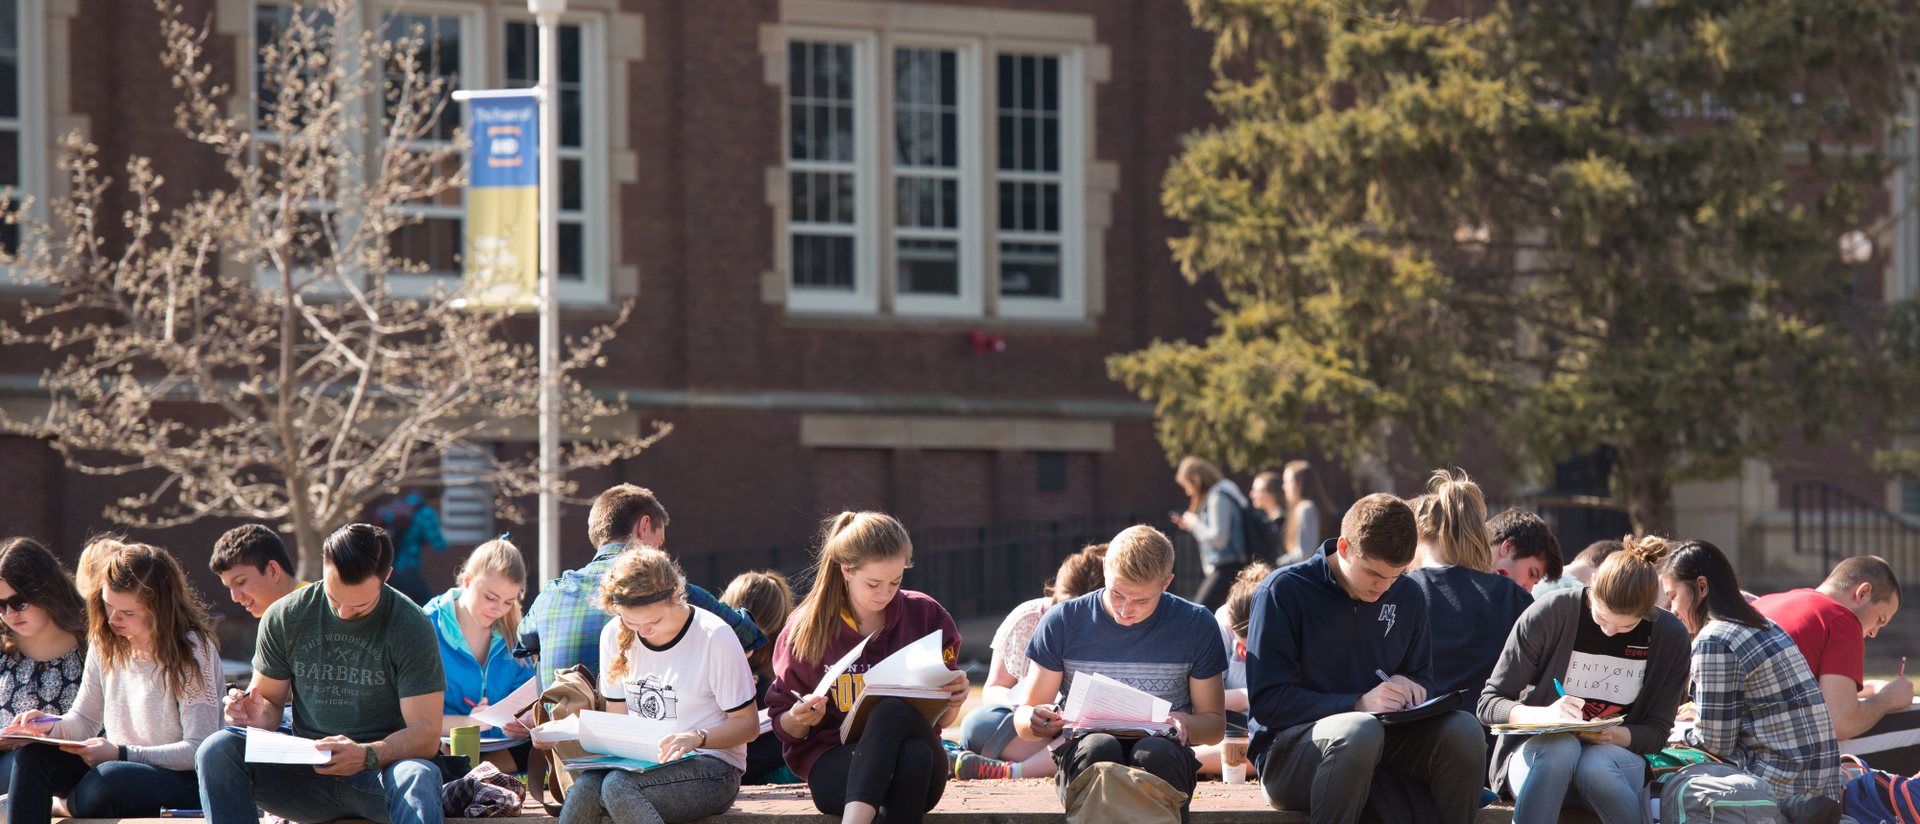 UW-Eau Claire students study in front of Schofield Hall.